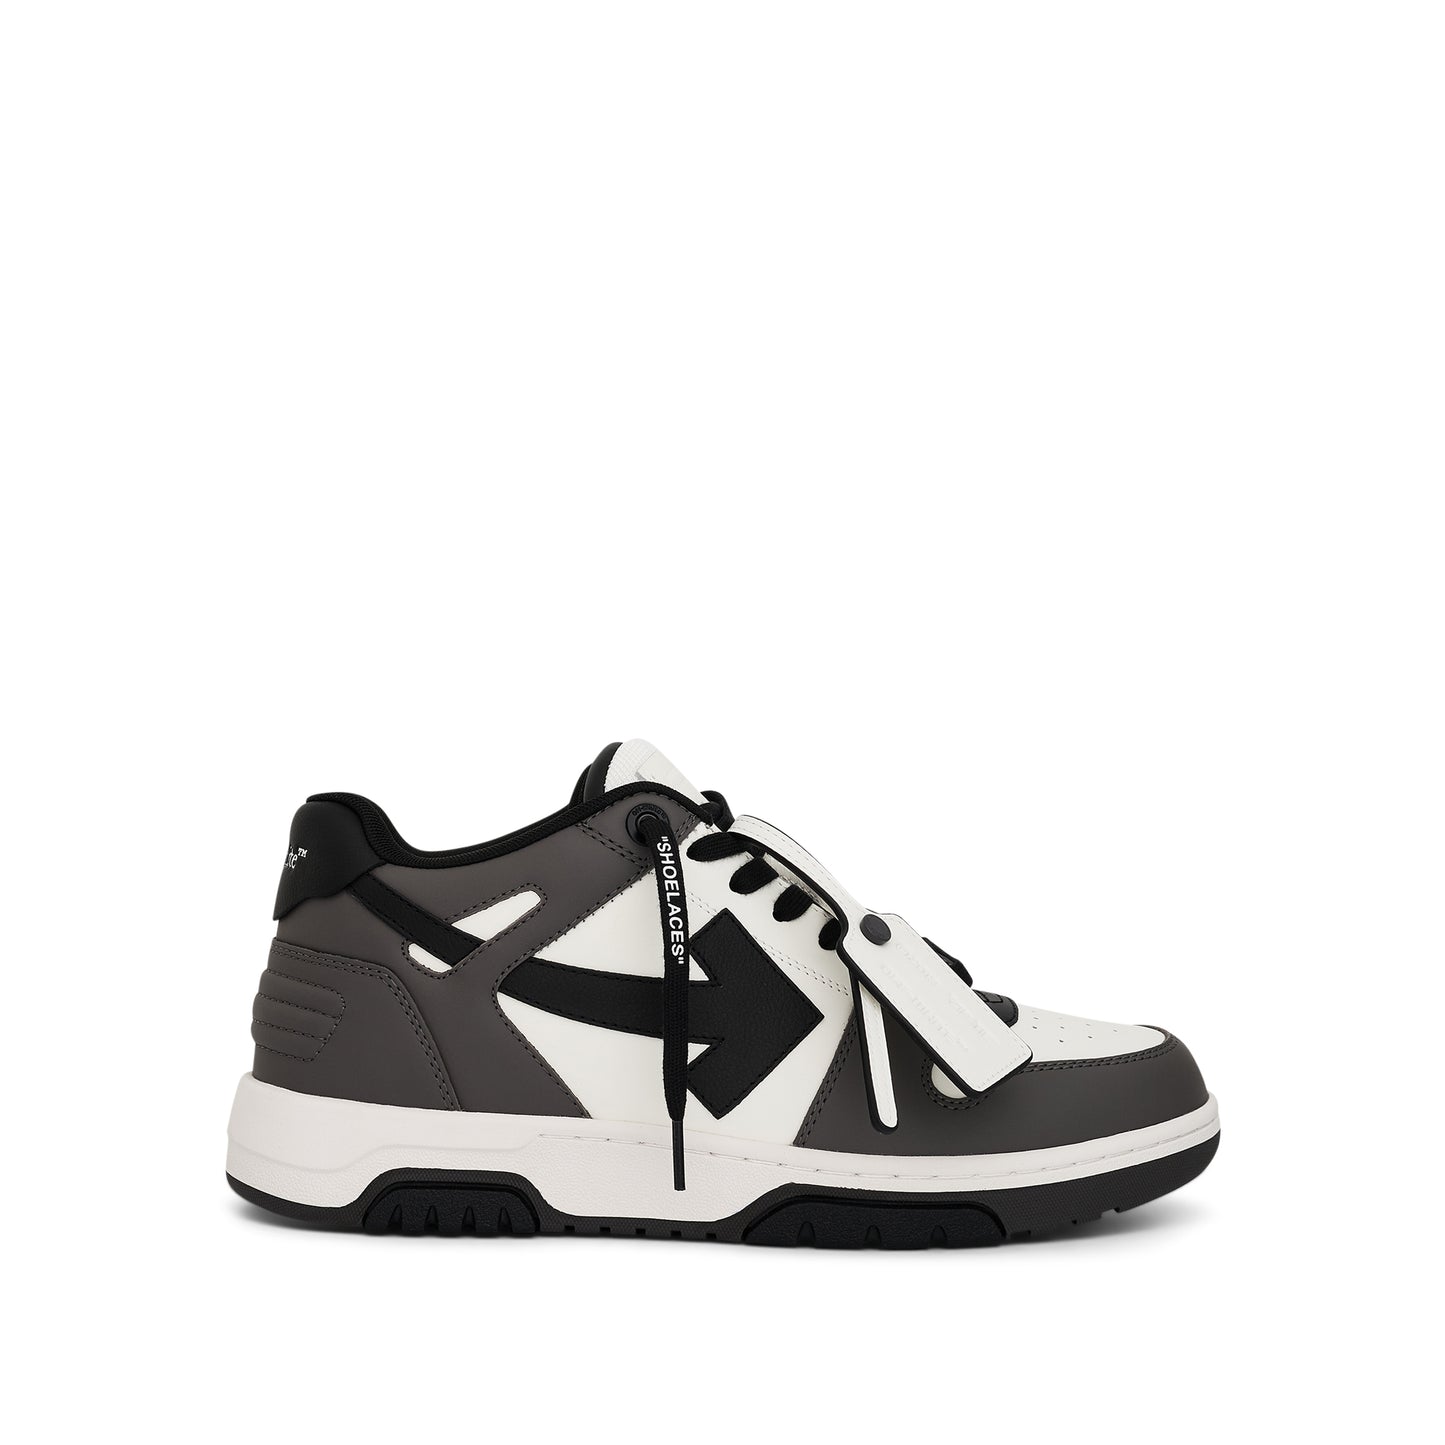 Out of Office Calf Leather Sneaker Dark Grey/Black